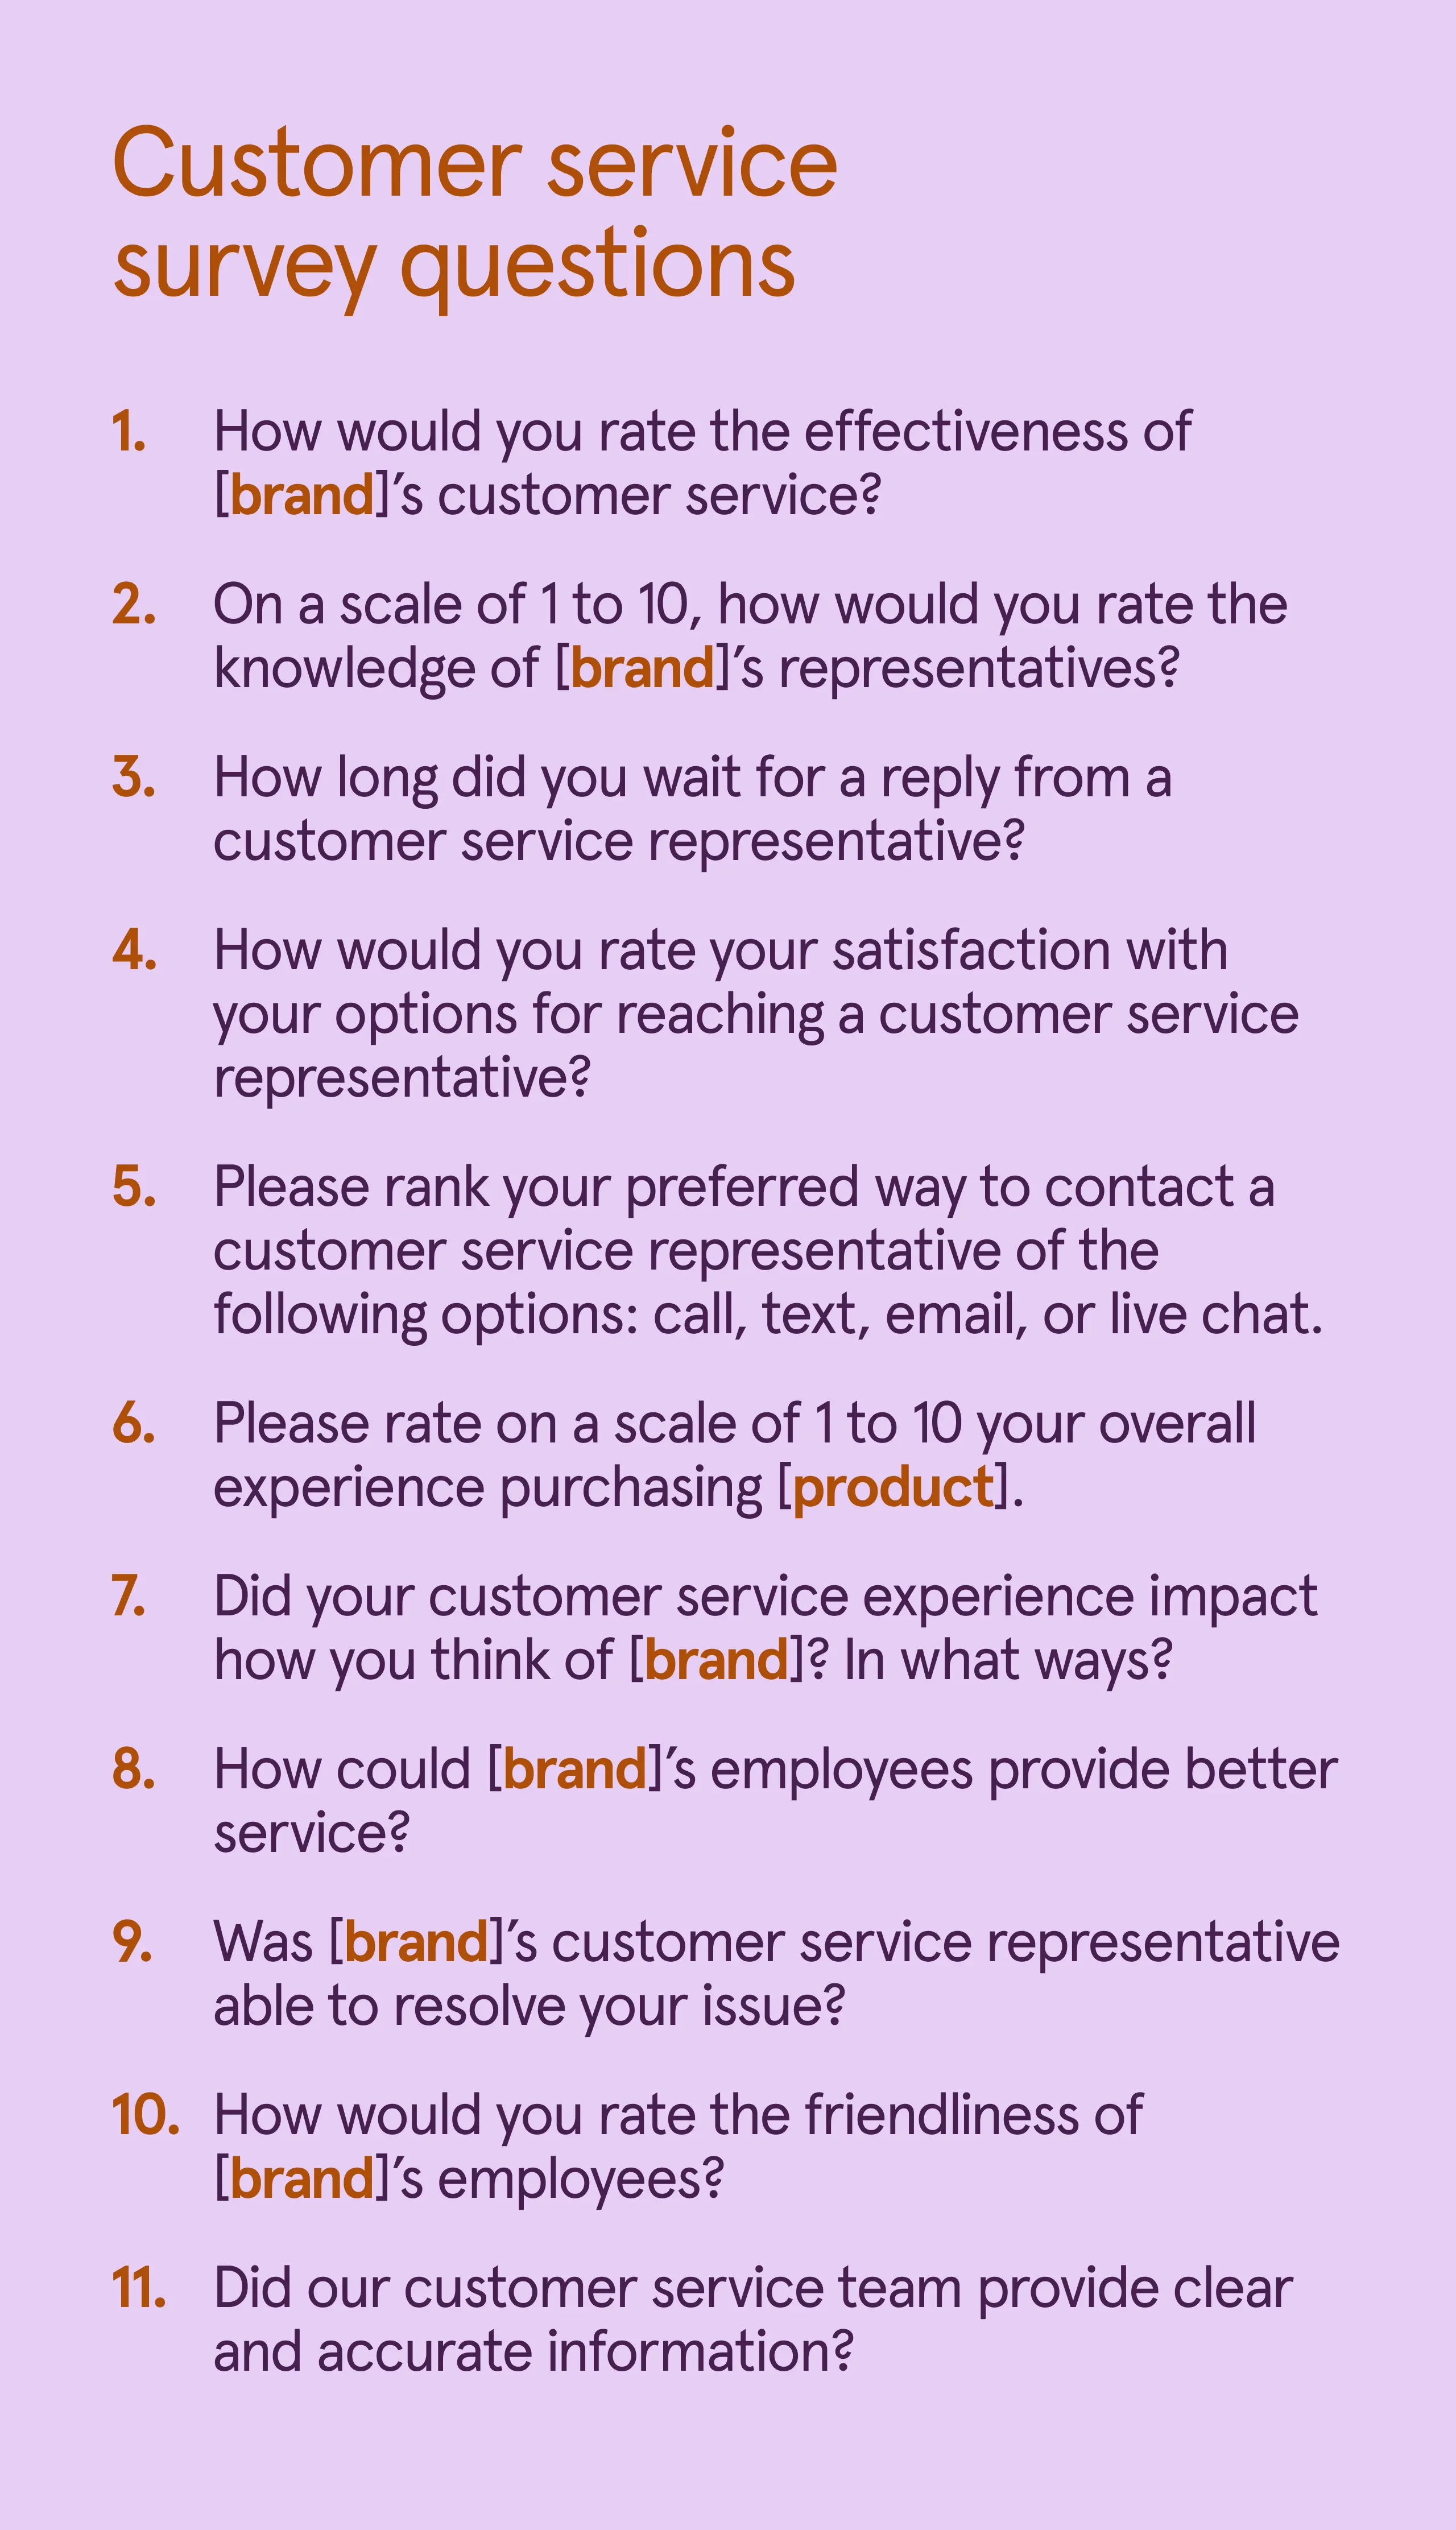 List of 11 customer service survey question examples.